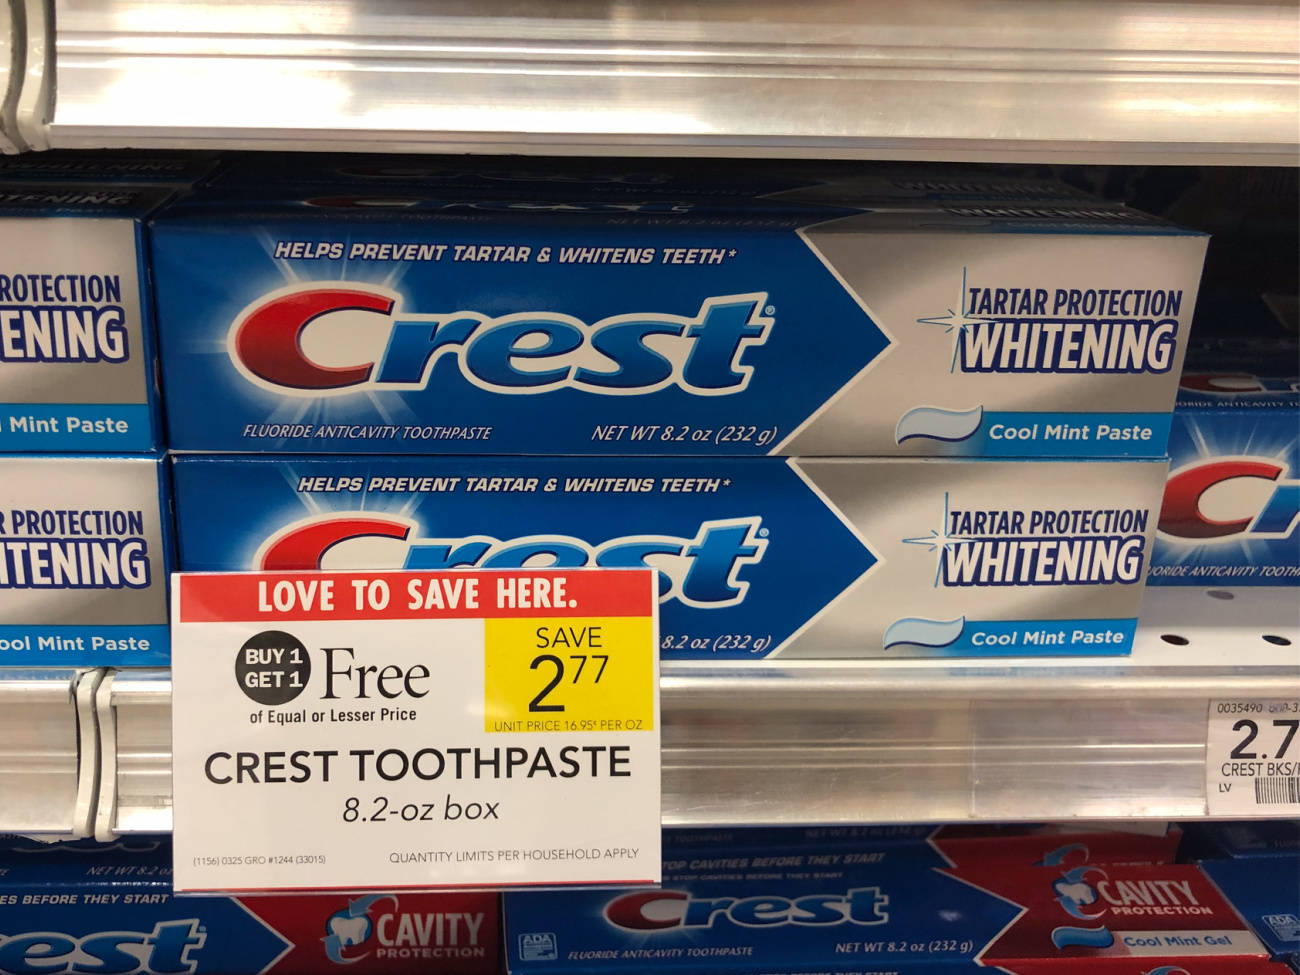 Don't Miss This BOGO Sale On Crest Toothpaste - Grab A Great Deal At Publix on I Heart Publix 1